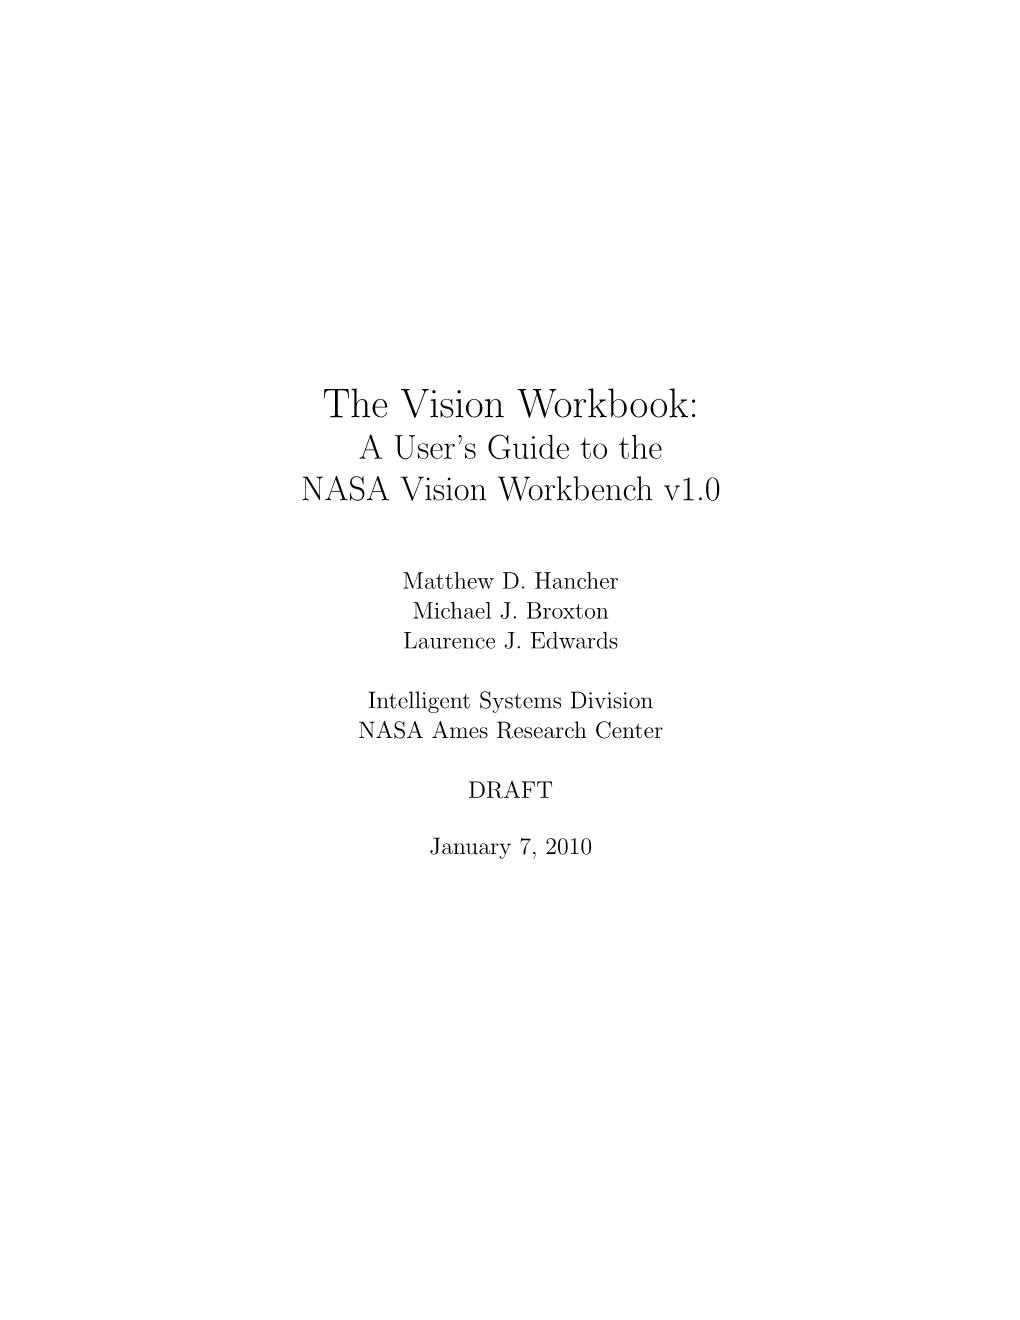 The Vision Workbook: a User’S Guide to the NASA Vision Workbench V1.0